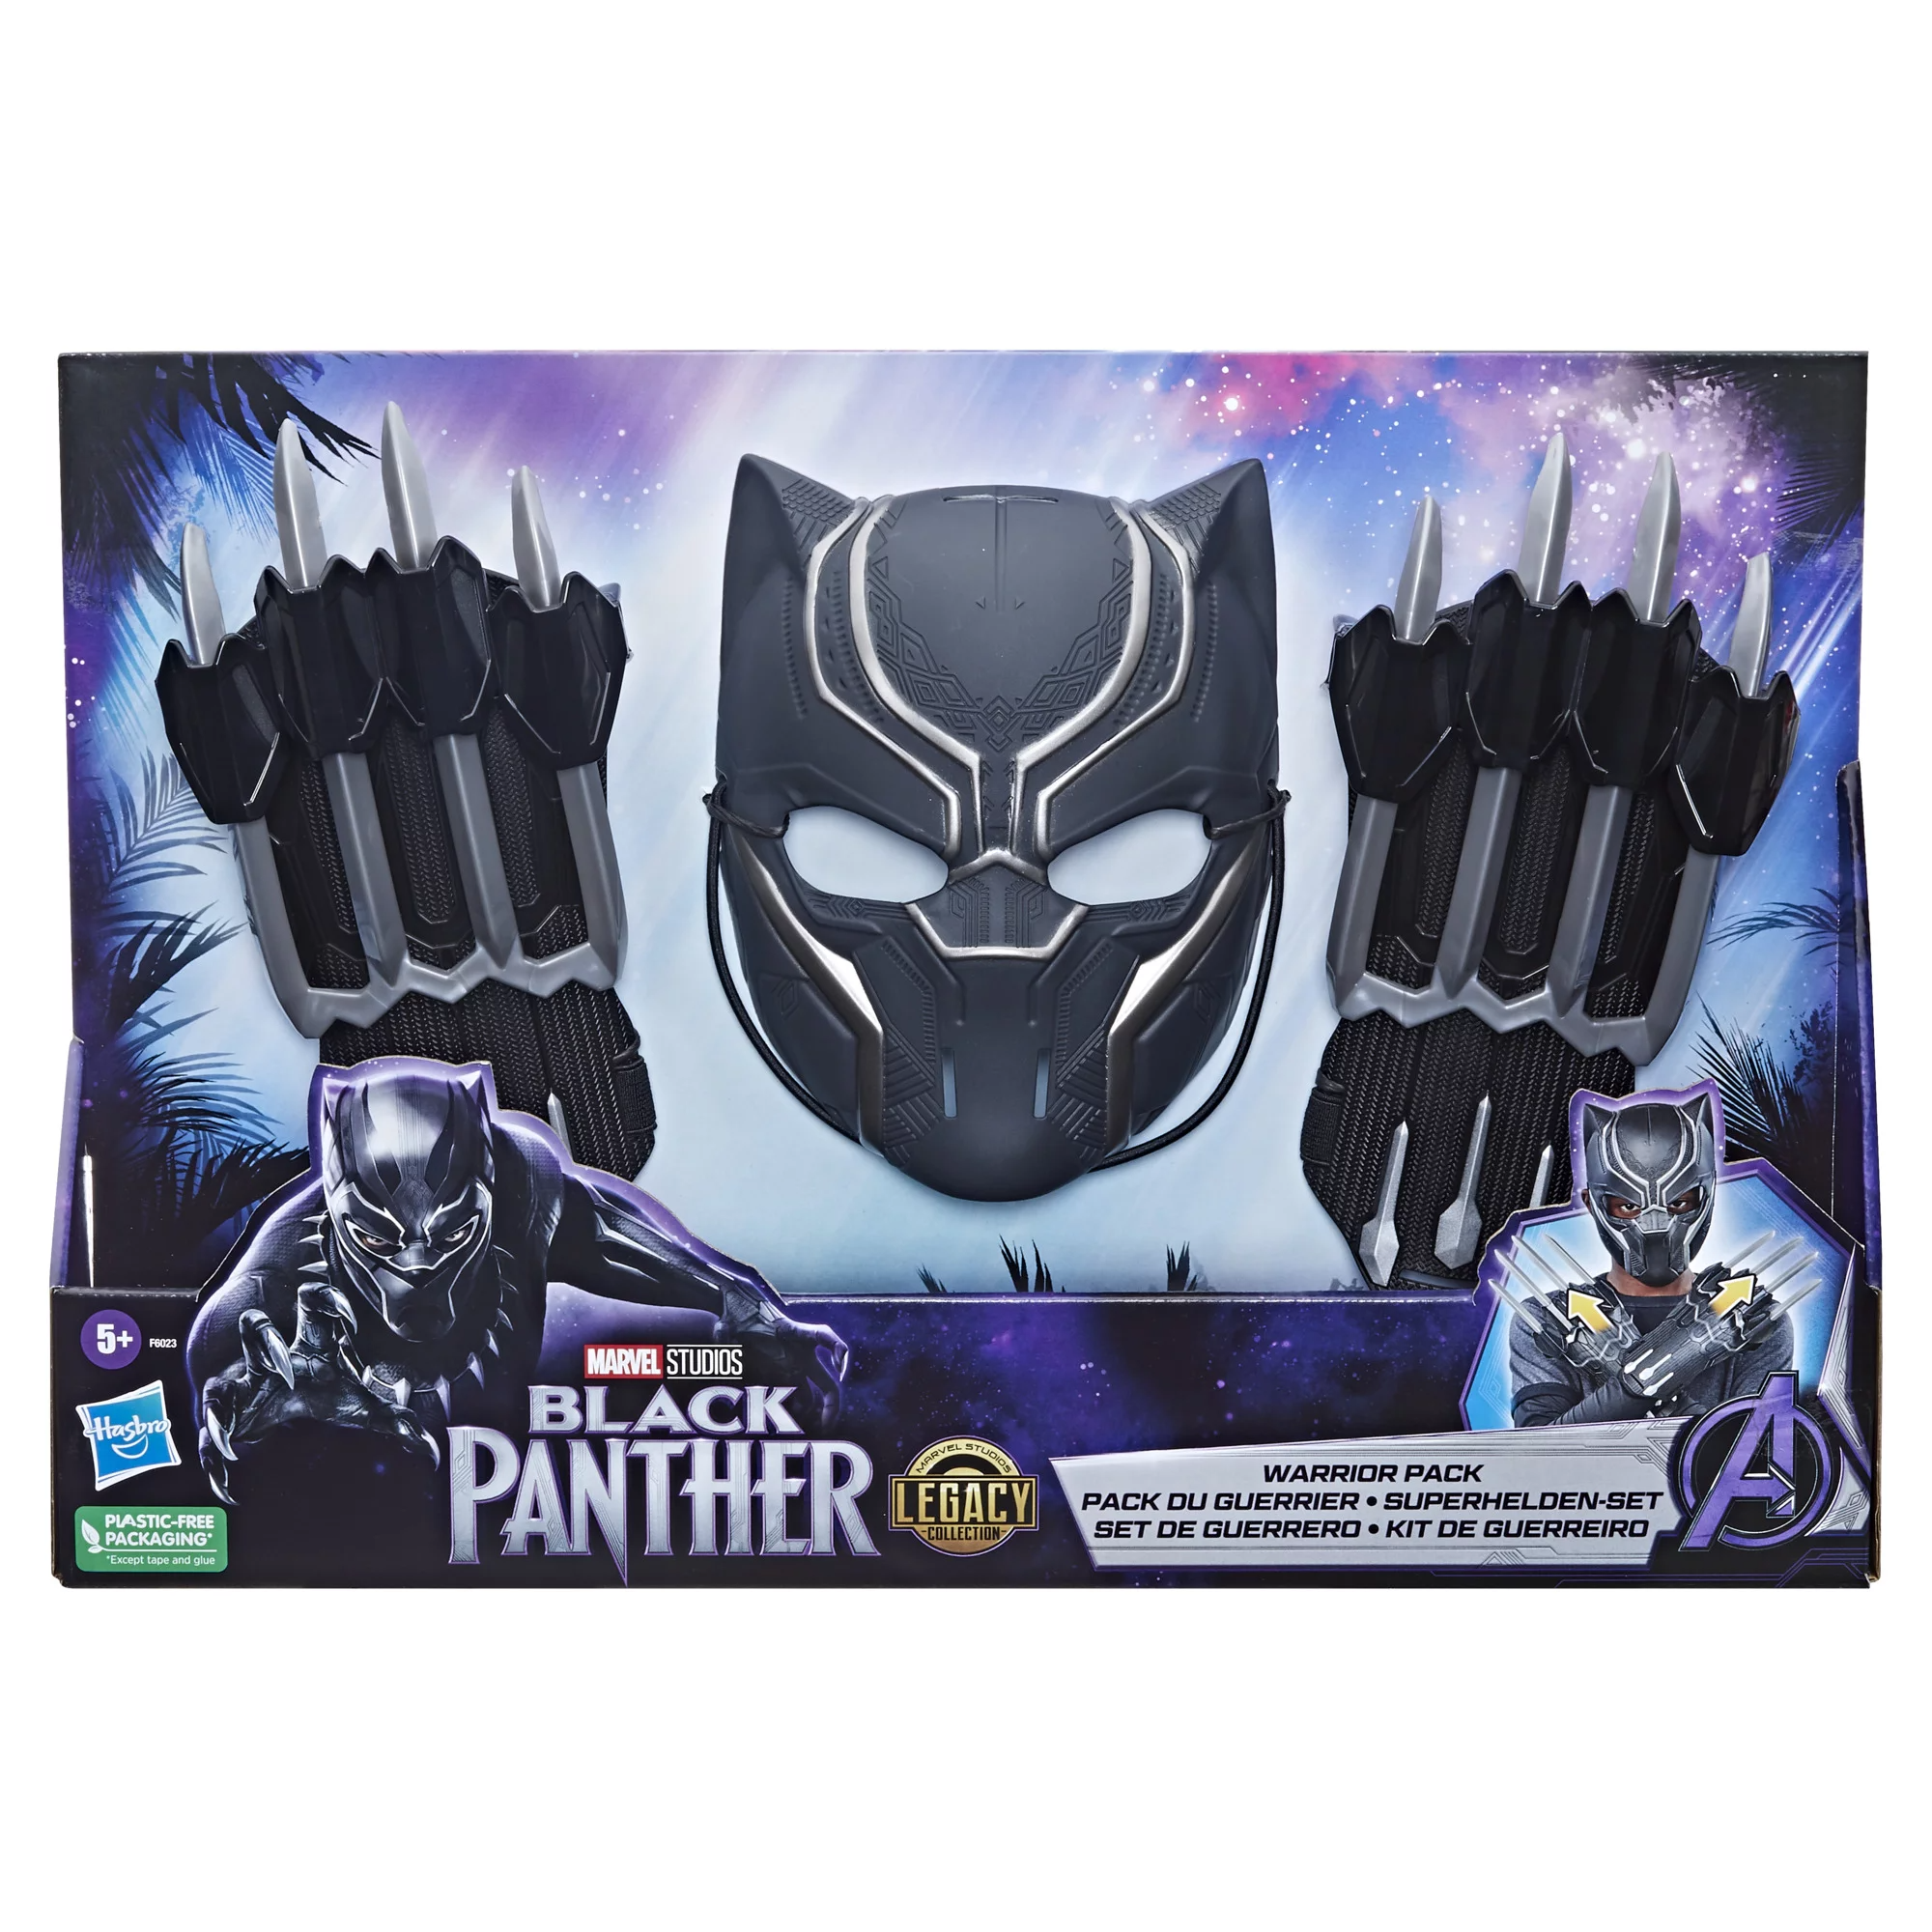 A close up of the Black Panther packaging